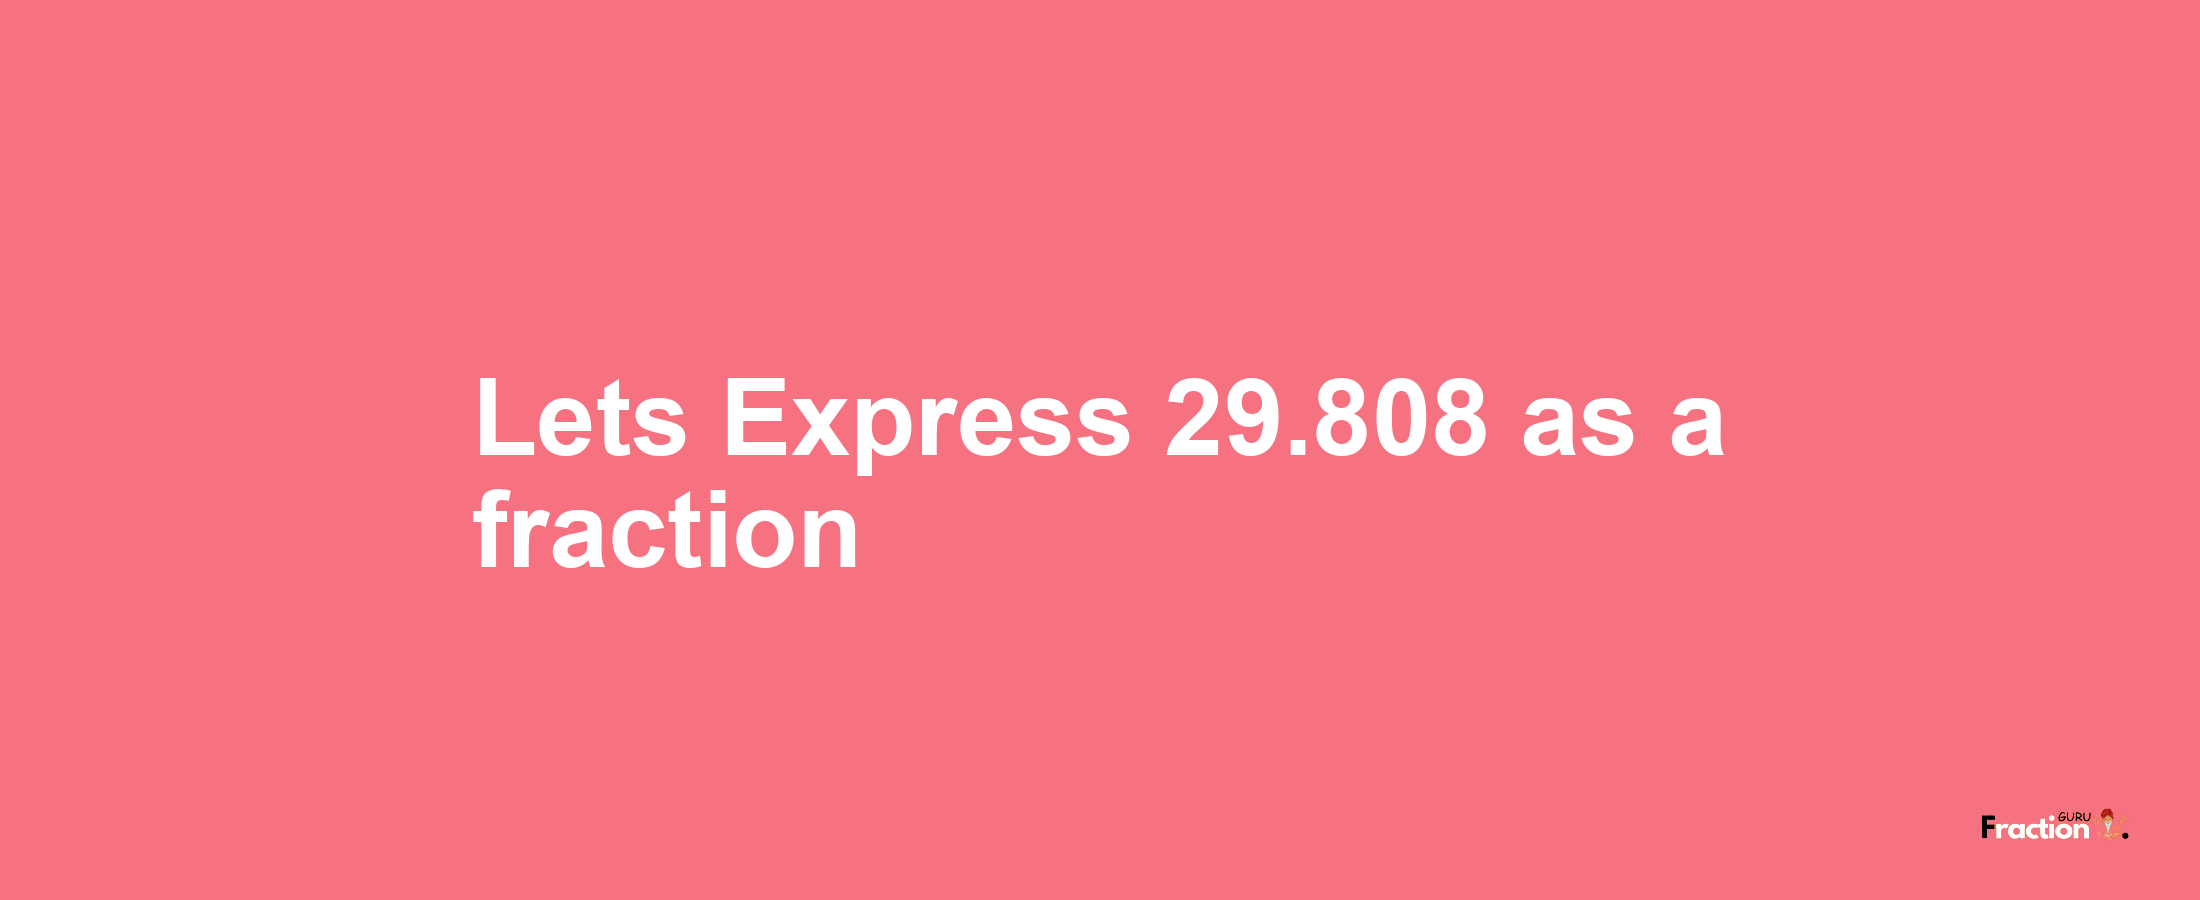 Lets Express 29.808 as afraction